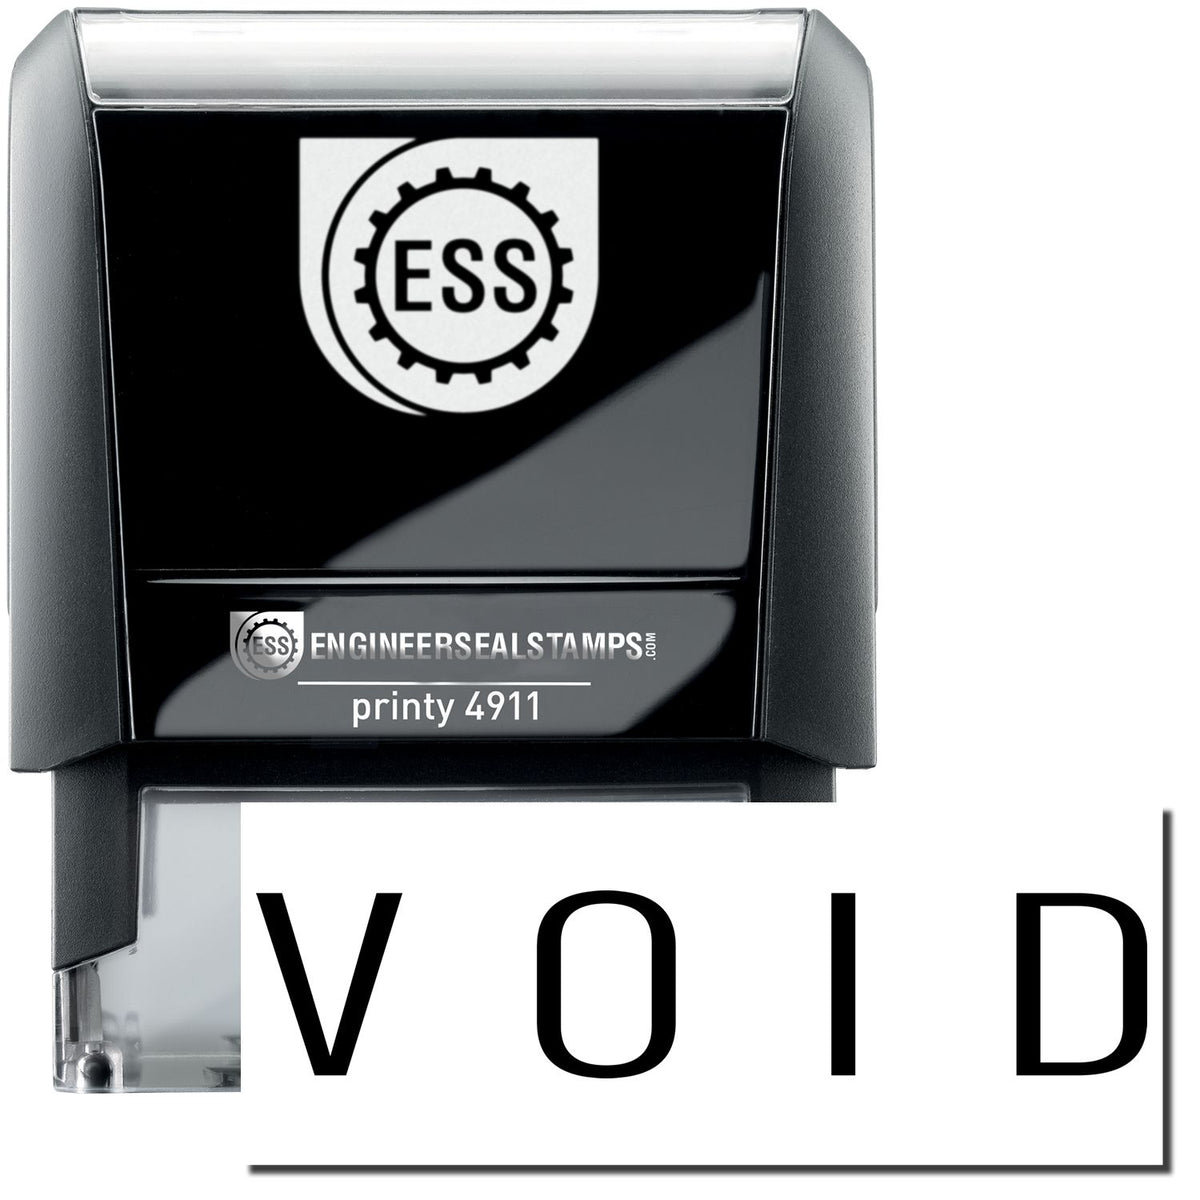 A self-inking stamp with a stamped image showing how the text &quot;V O I D&quot; in a narrow font is displayed after stamping.